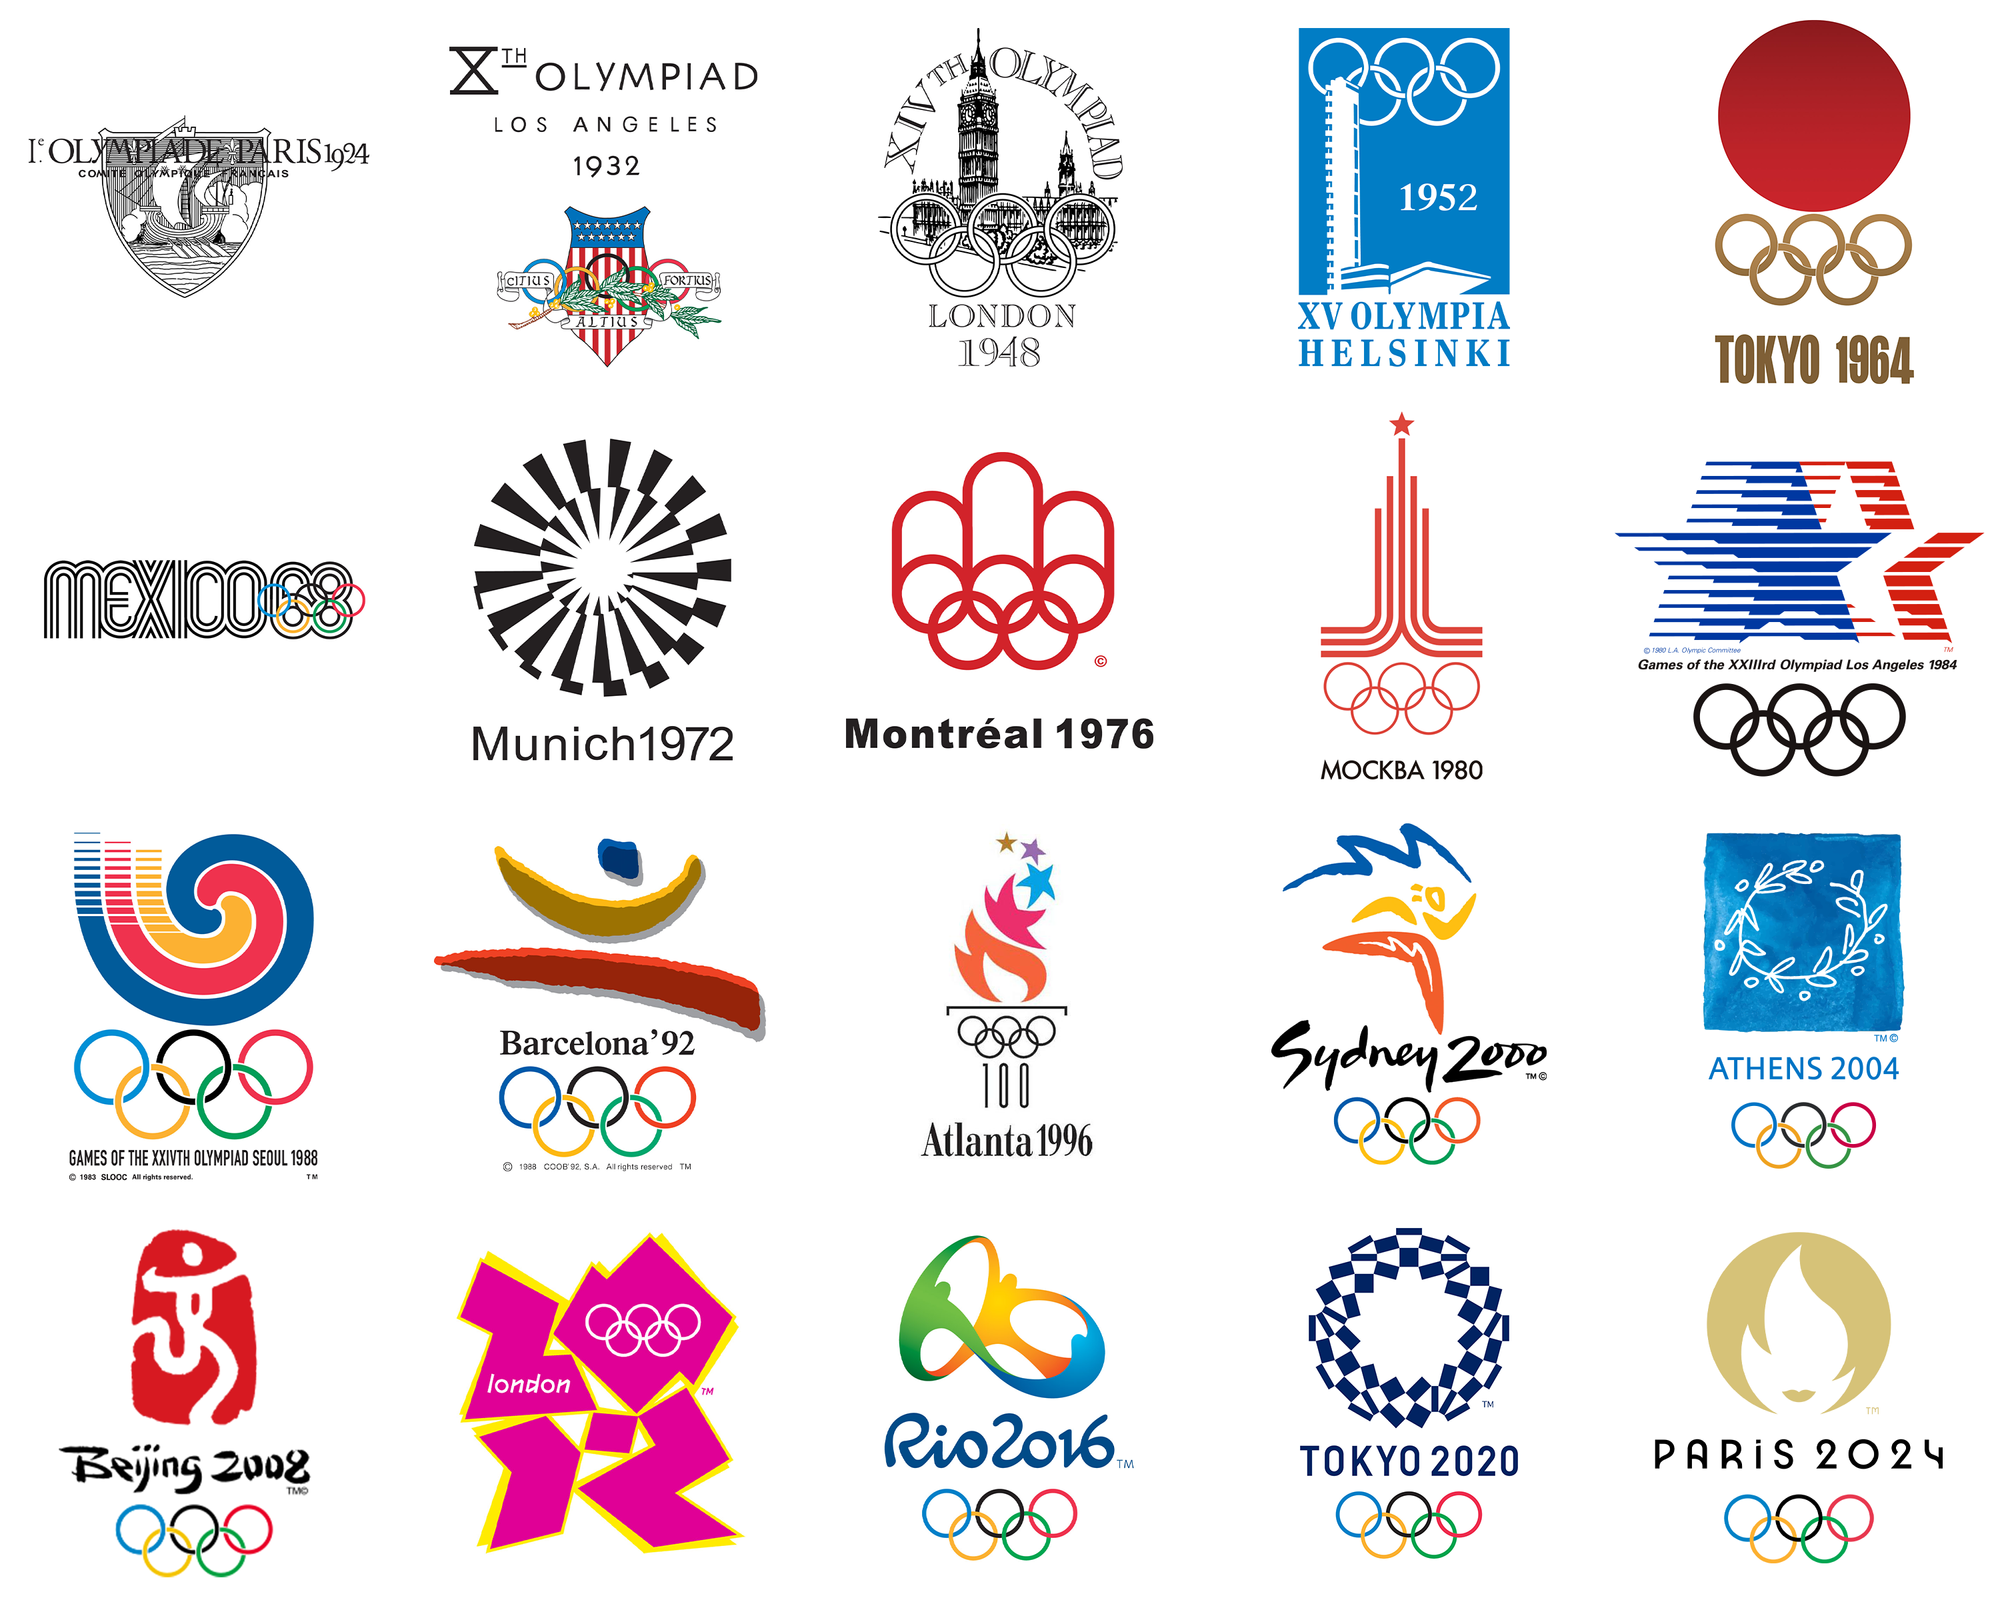 A decade later: Was the London 2012 logo really that bad?